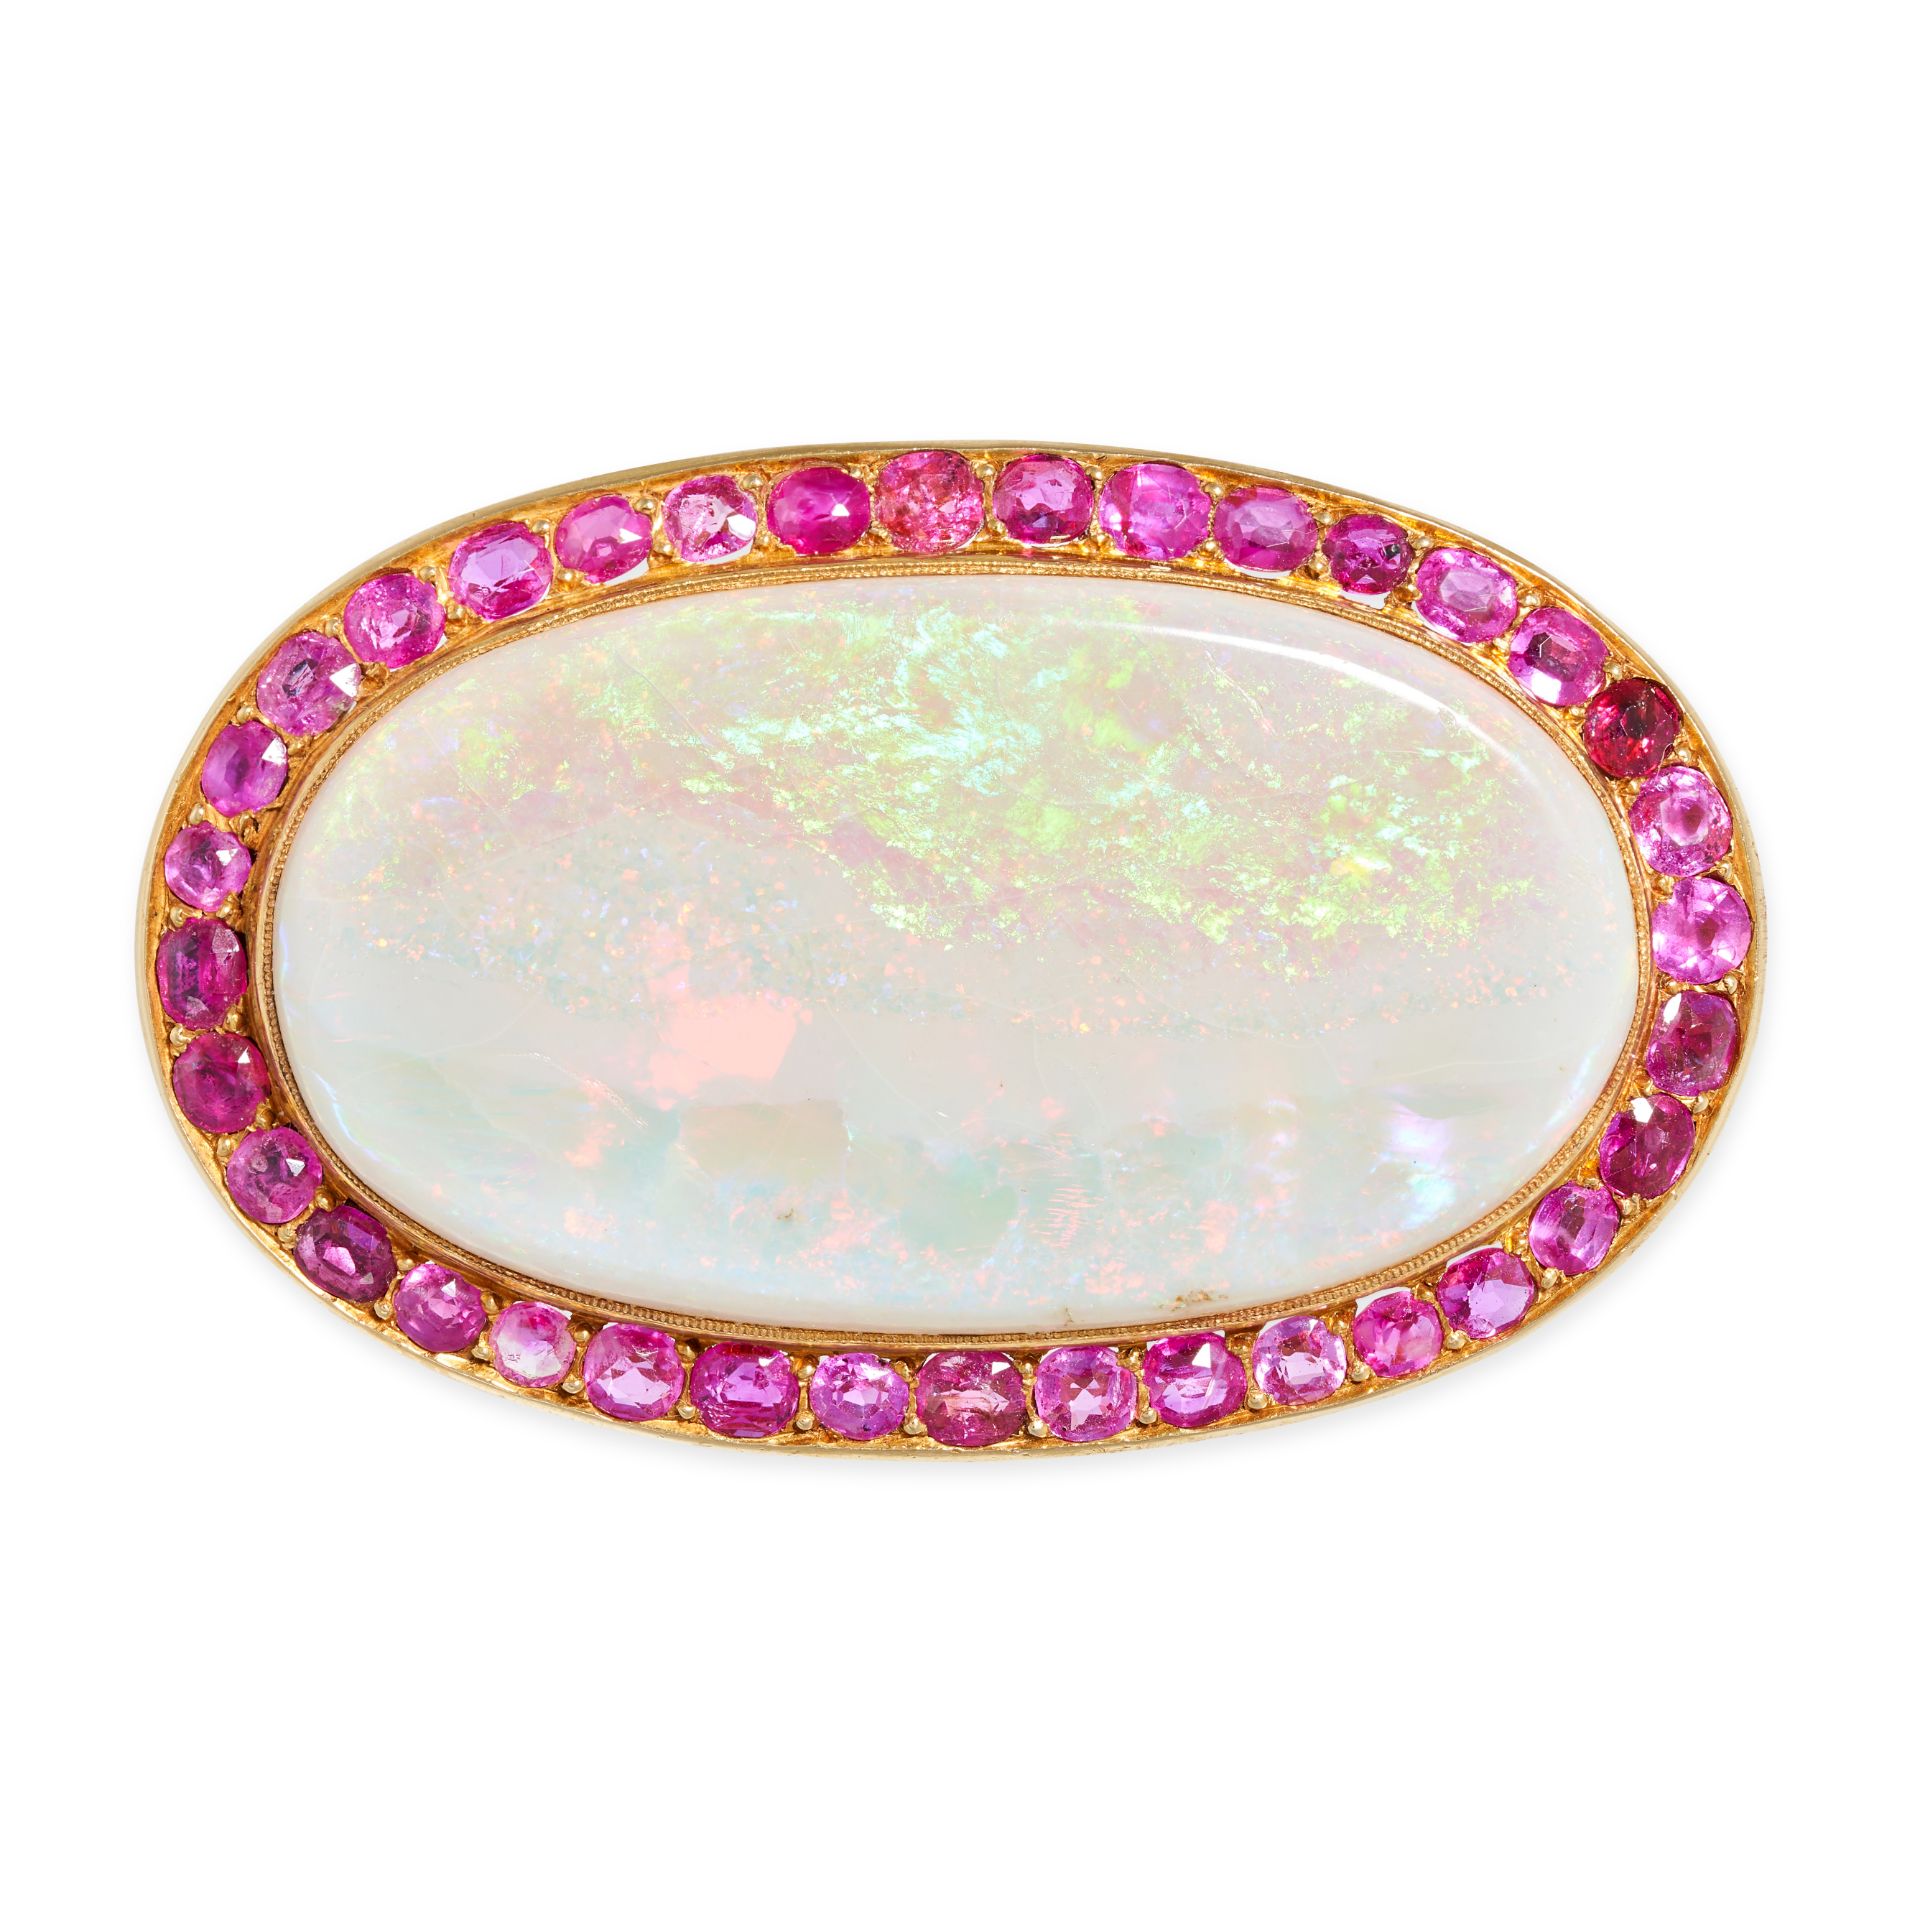 NO RESERVE - A FINE FRENCH ANTIQUE OPAL AND RUBY BROOCH in 18ct yellow gold, set with a cabochon ...